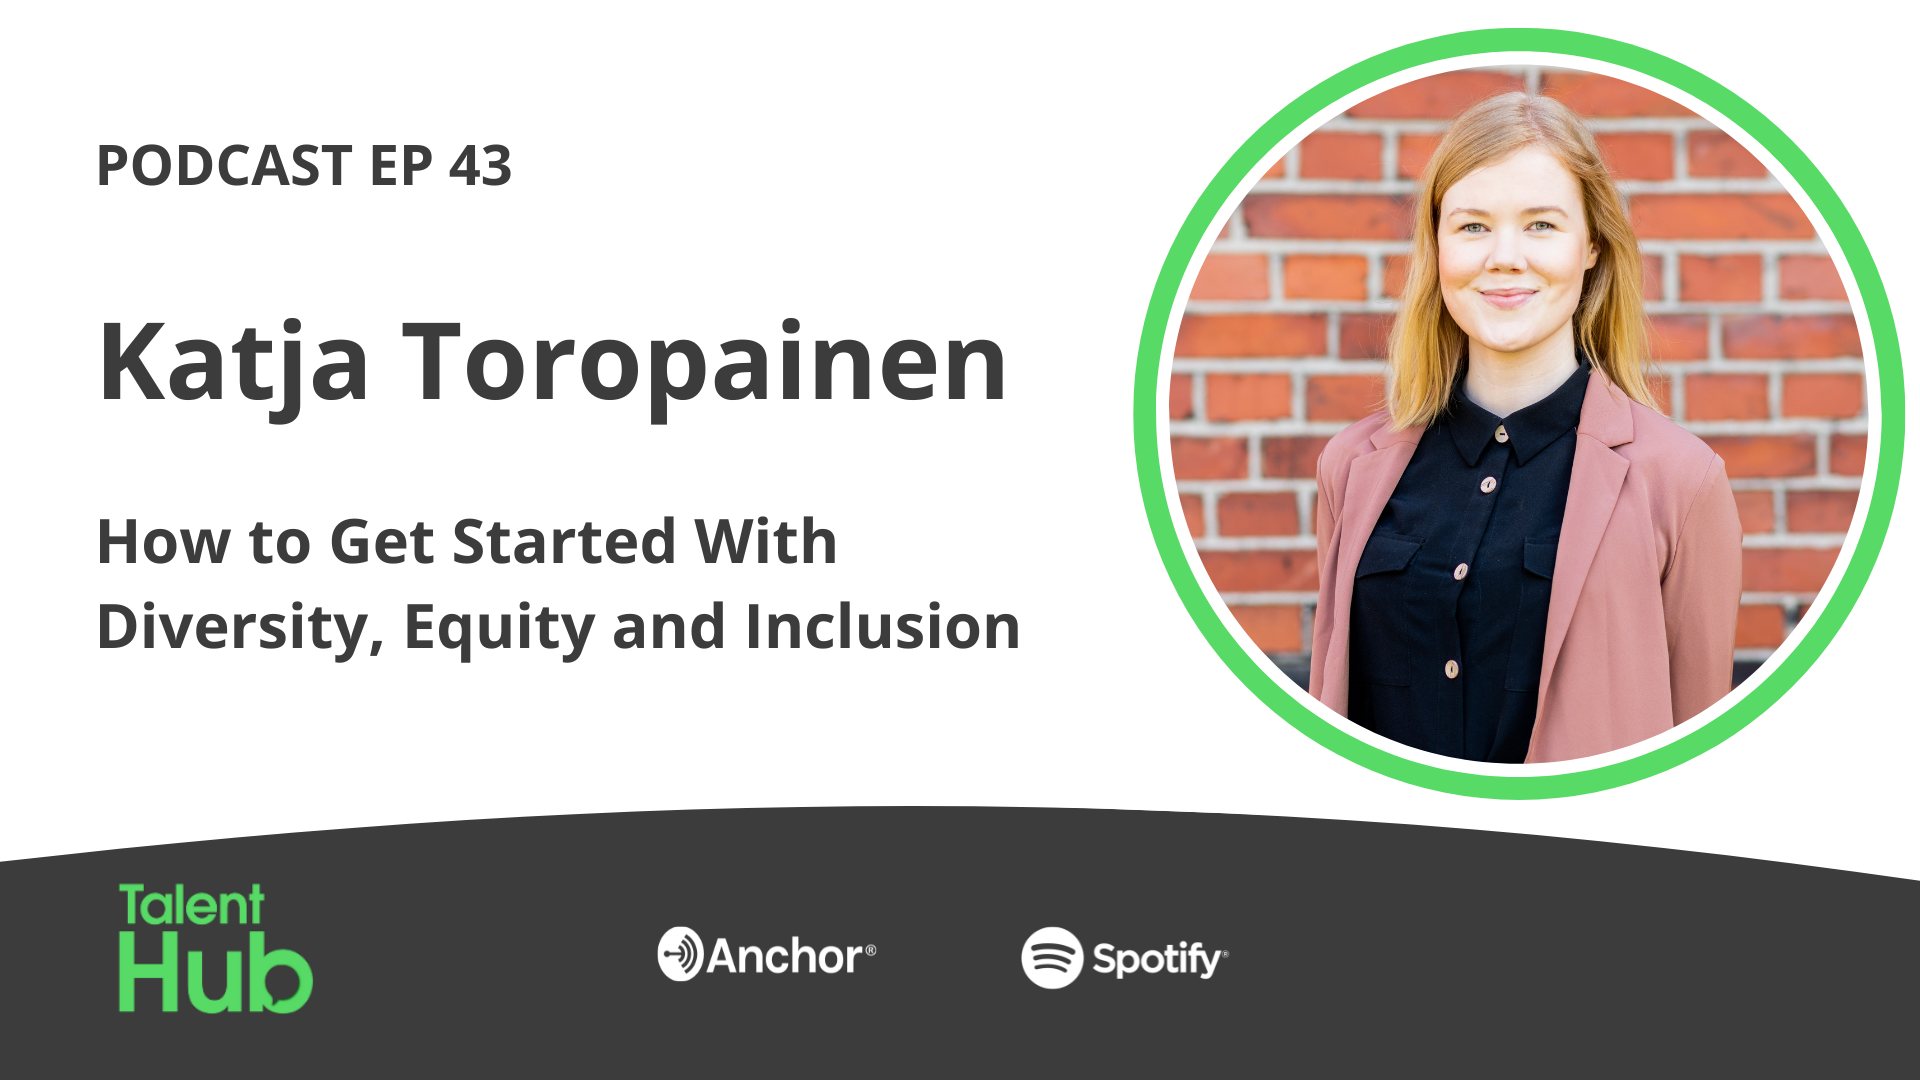 Katja Toropainen: How to Get Started With Diversity, Equity and Inclusion